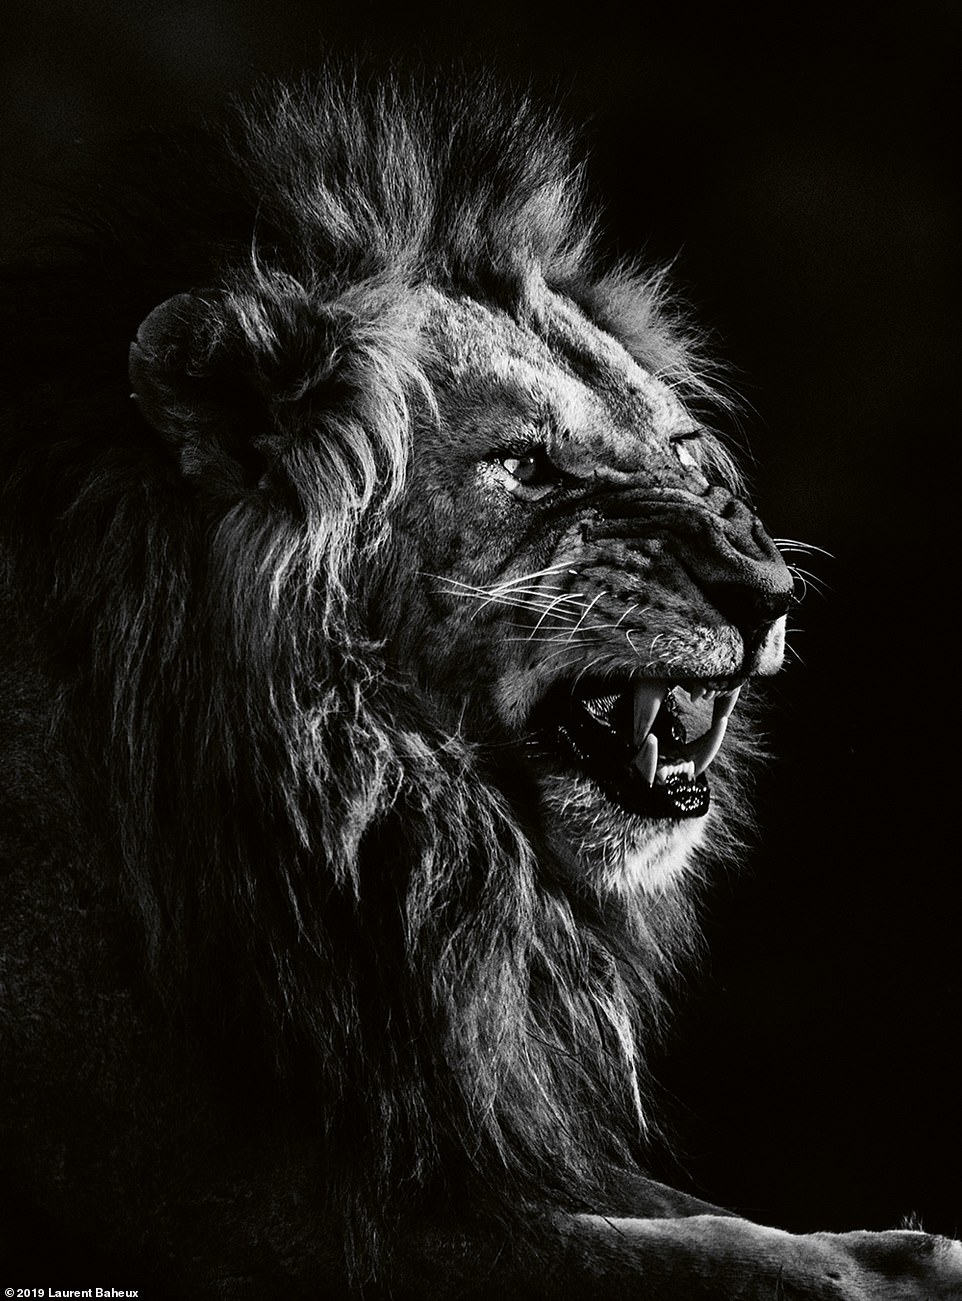 18565902-7472331-French_photographer_Laurent_Baheux_spent_nearly_20_years_travell-a-79_1568713520801.jpg